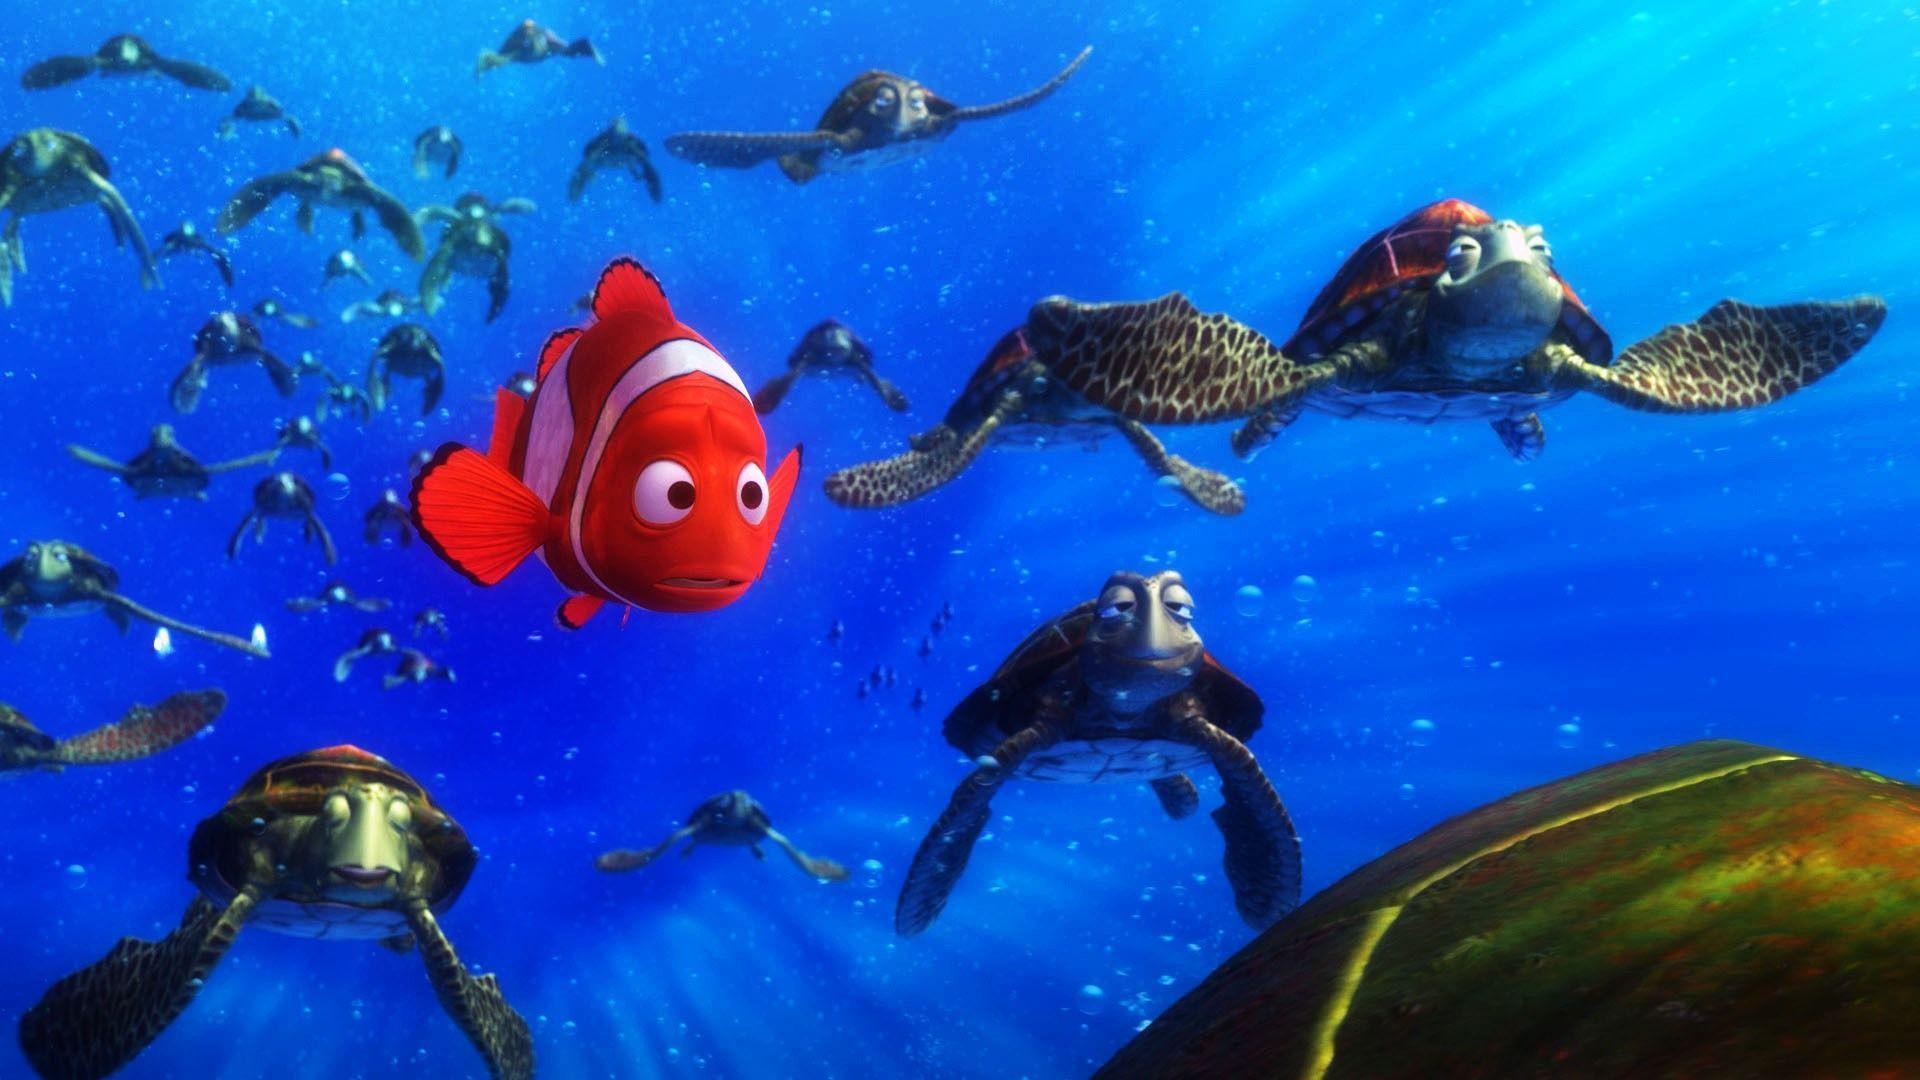 Finding Nemo (2003) Movie in HD and Wallpaper